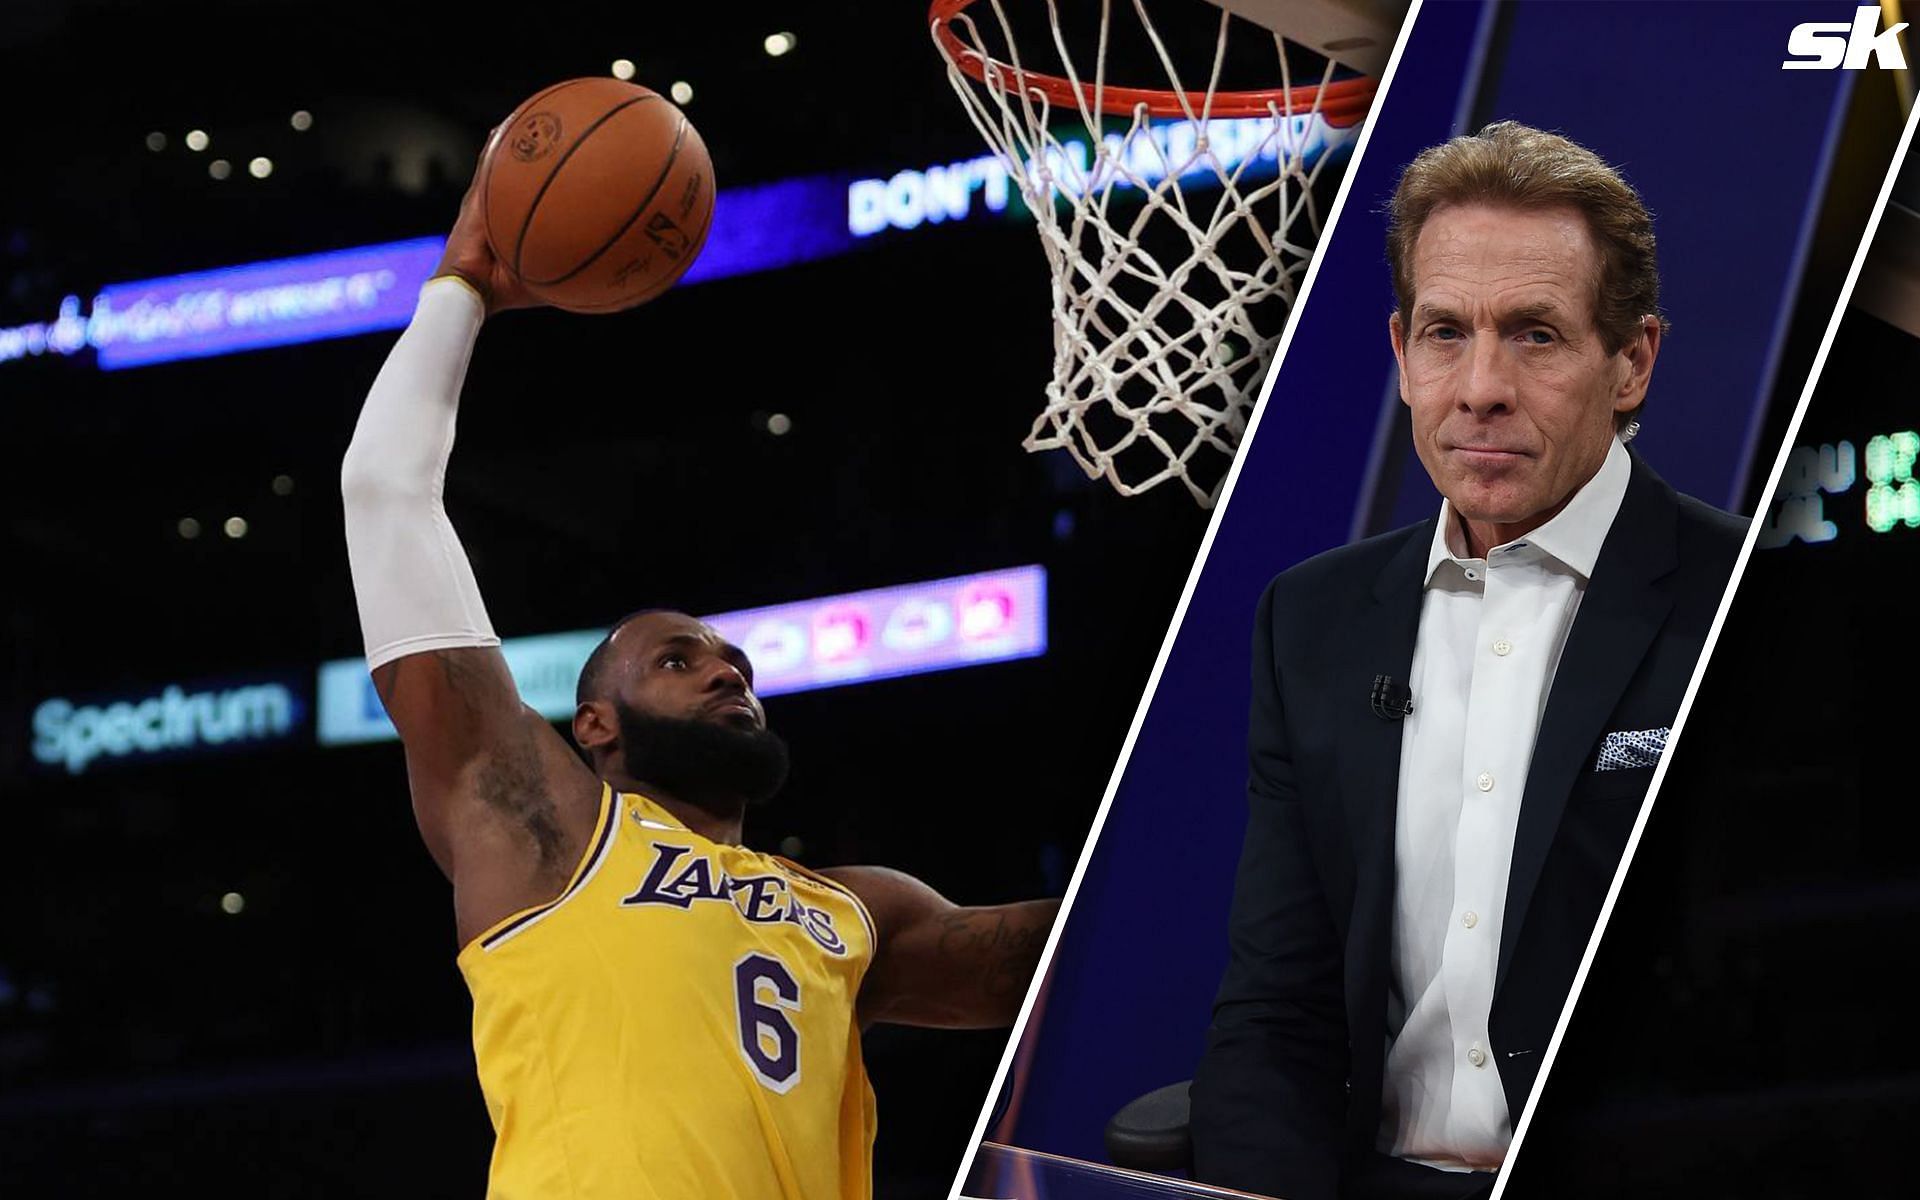 Enter caption Enter caption Skip Bayless believes Michael Jordan will best LeBron James in a one-on-one game right now.